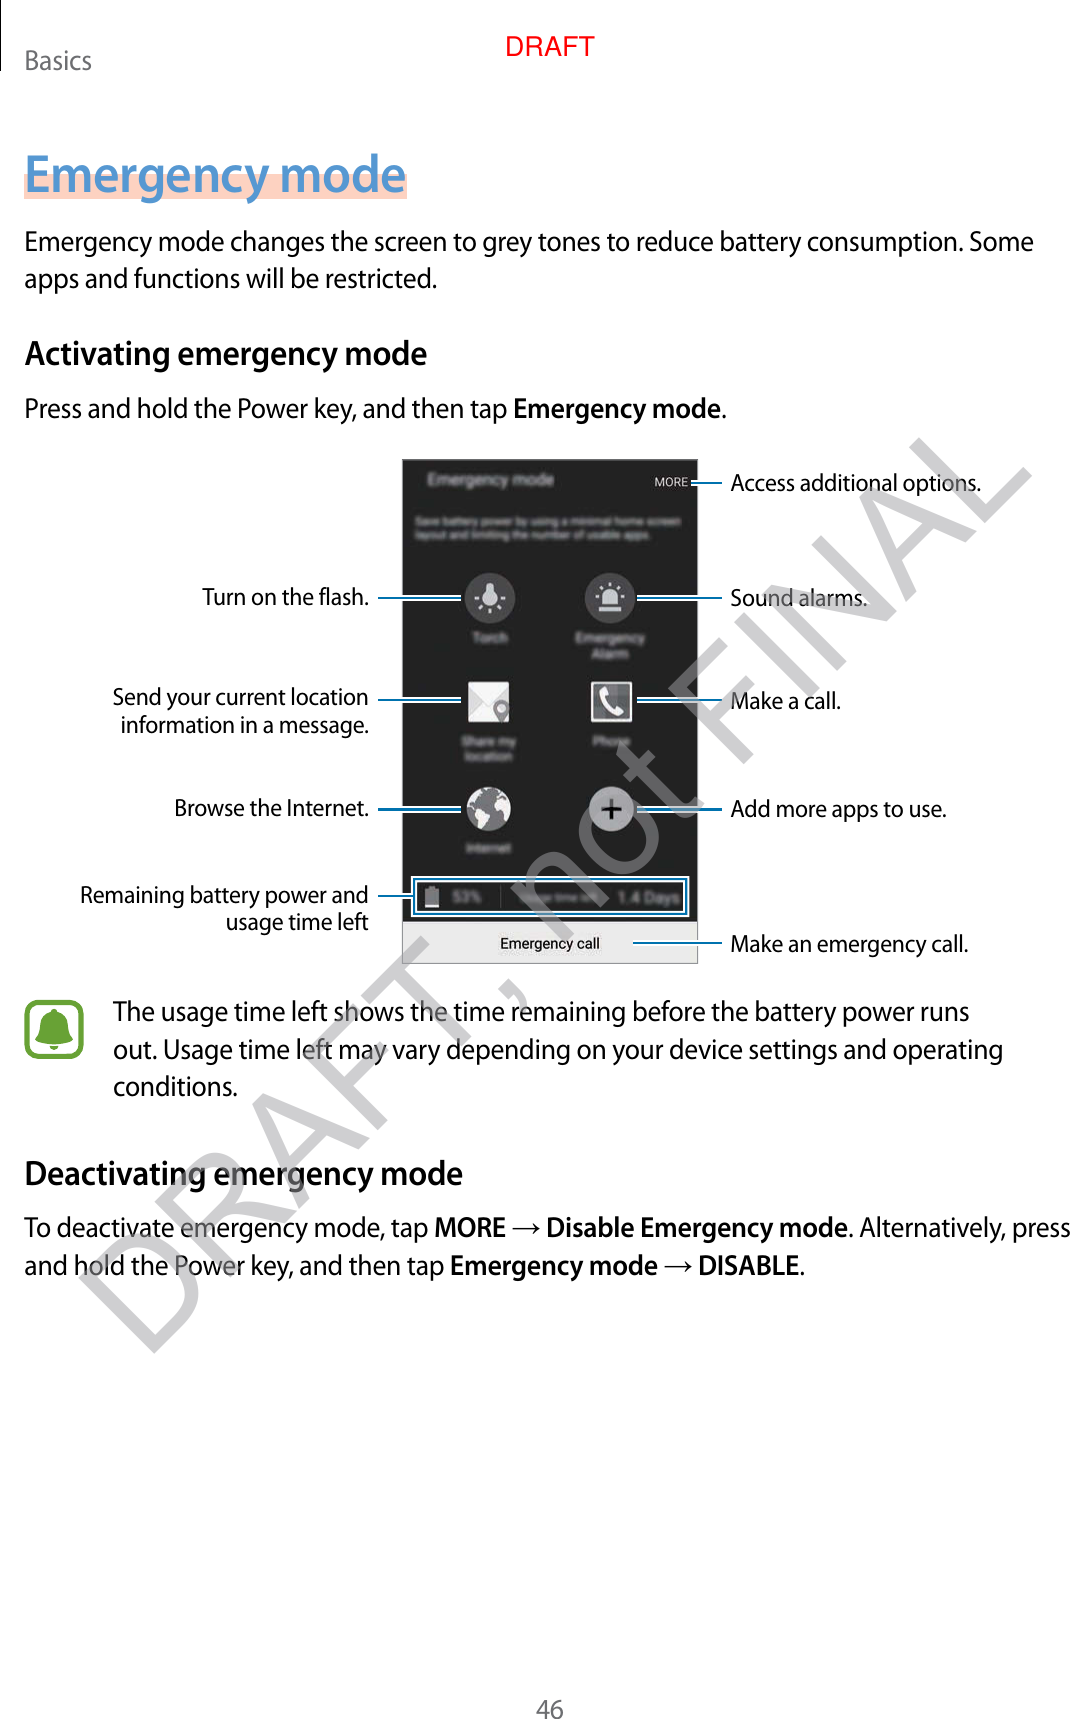 Basics46Emergency modeEmergency mode changes the screen to gr ey t ones to r educ e batt ery consumption. Some apps and functions will be restricted .Activating emer gency modePr ess and hold the Pow er key, and then tap Emergency mode.Add mor e apps to use .Make an emergency call.Remaining battery power and usage time leftTurn on the flash.Make a call.Send your current location information in a message .Brow se the Internet.Acc ess additional options .Sound alarms.The usage time left shows the time r emaining bef or e the batt ery power runs out. Usage time left may vary depending on your device settings and operating conditions.Deactiva ting emer gency modeTo deactivate emergency mode, tap MORE → Disable Emergency mode. Alternativ ely, pr ess and hold the P o w er key, and then tap Emergency mode → DISABLE.DRAFT, not FINALDRAFT